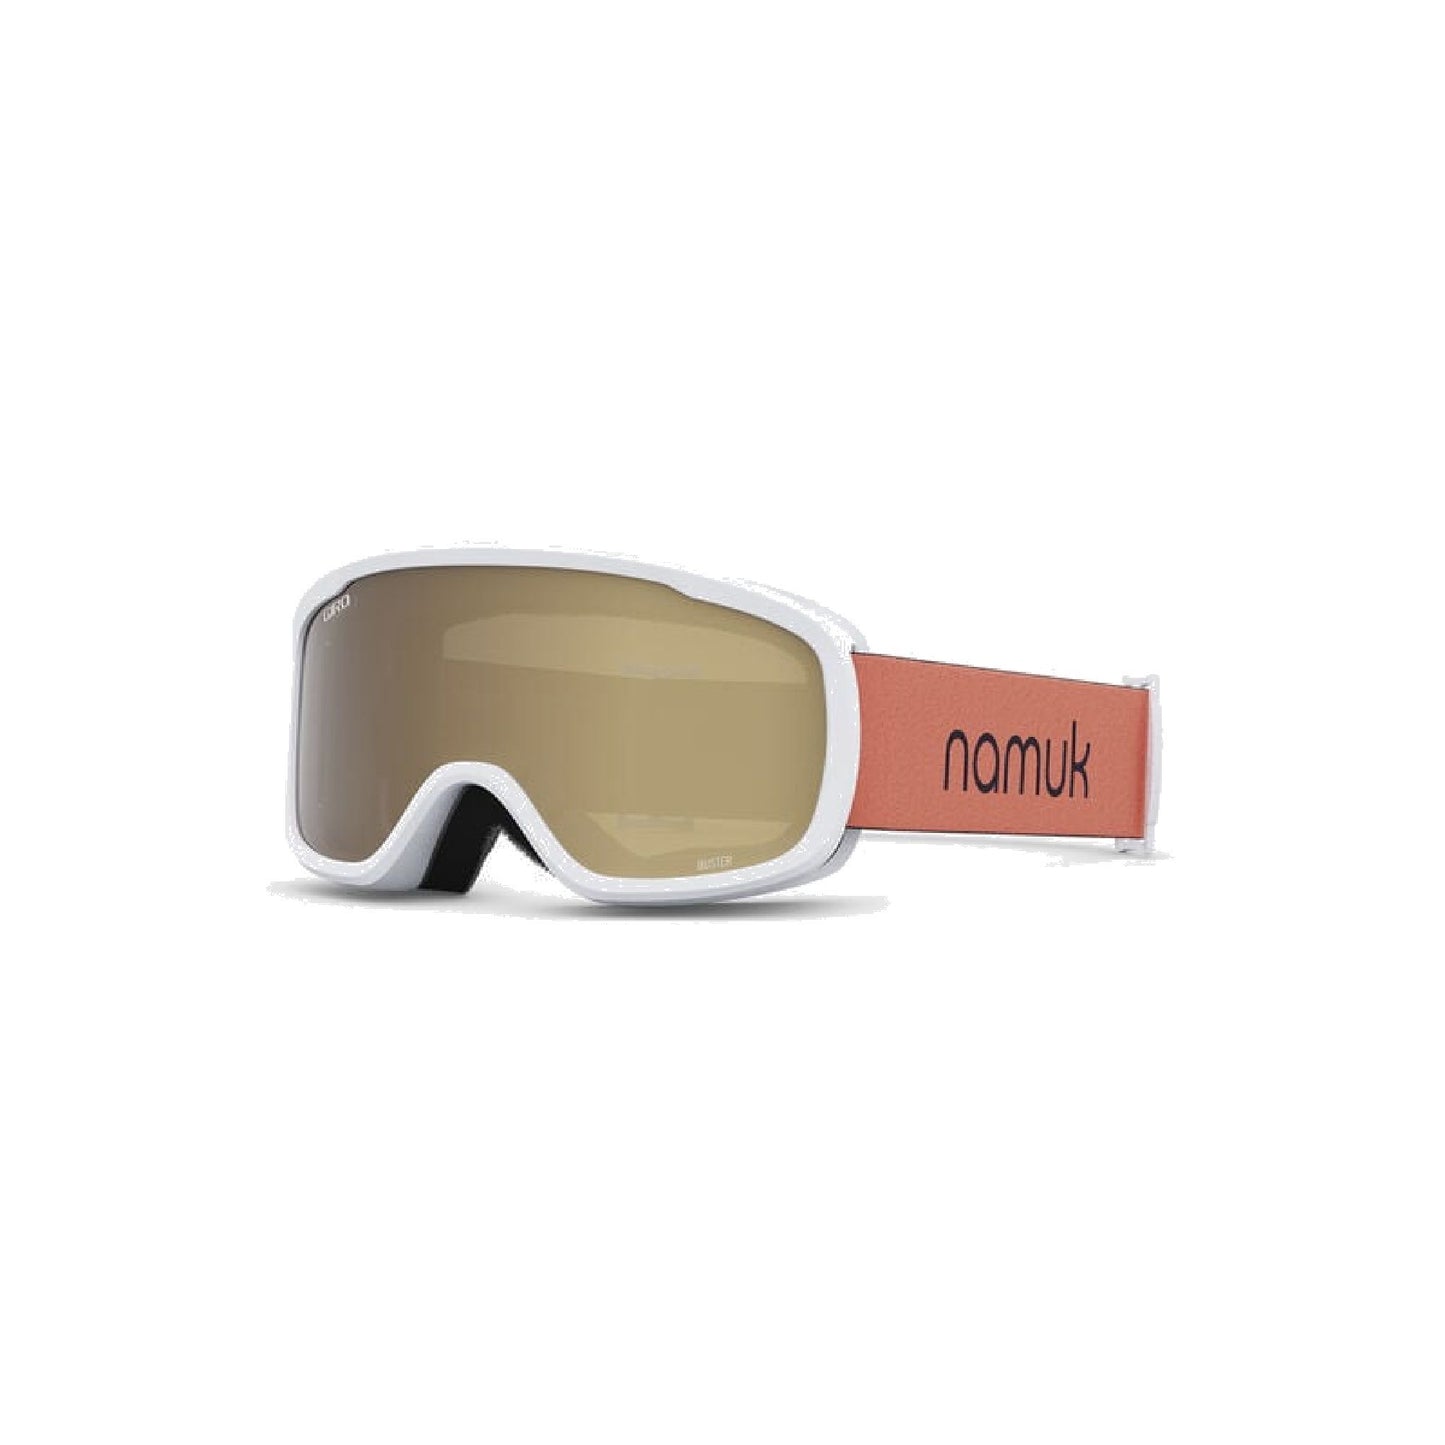 Giro Youth Buster Snow Goggles Namuk Coral True Navy Amber Rose Snow Goggles